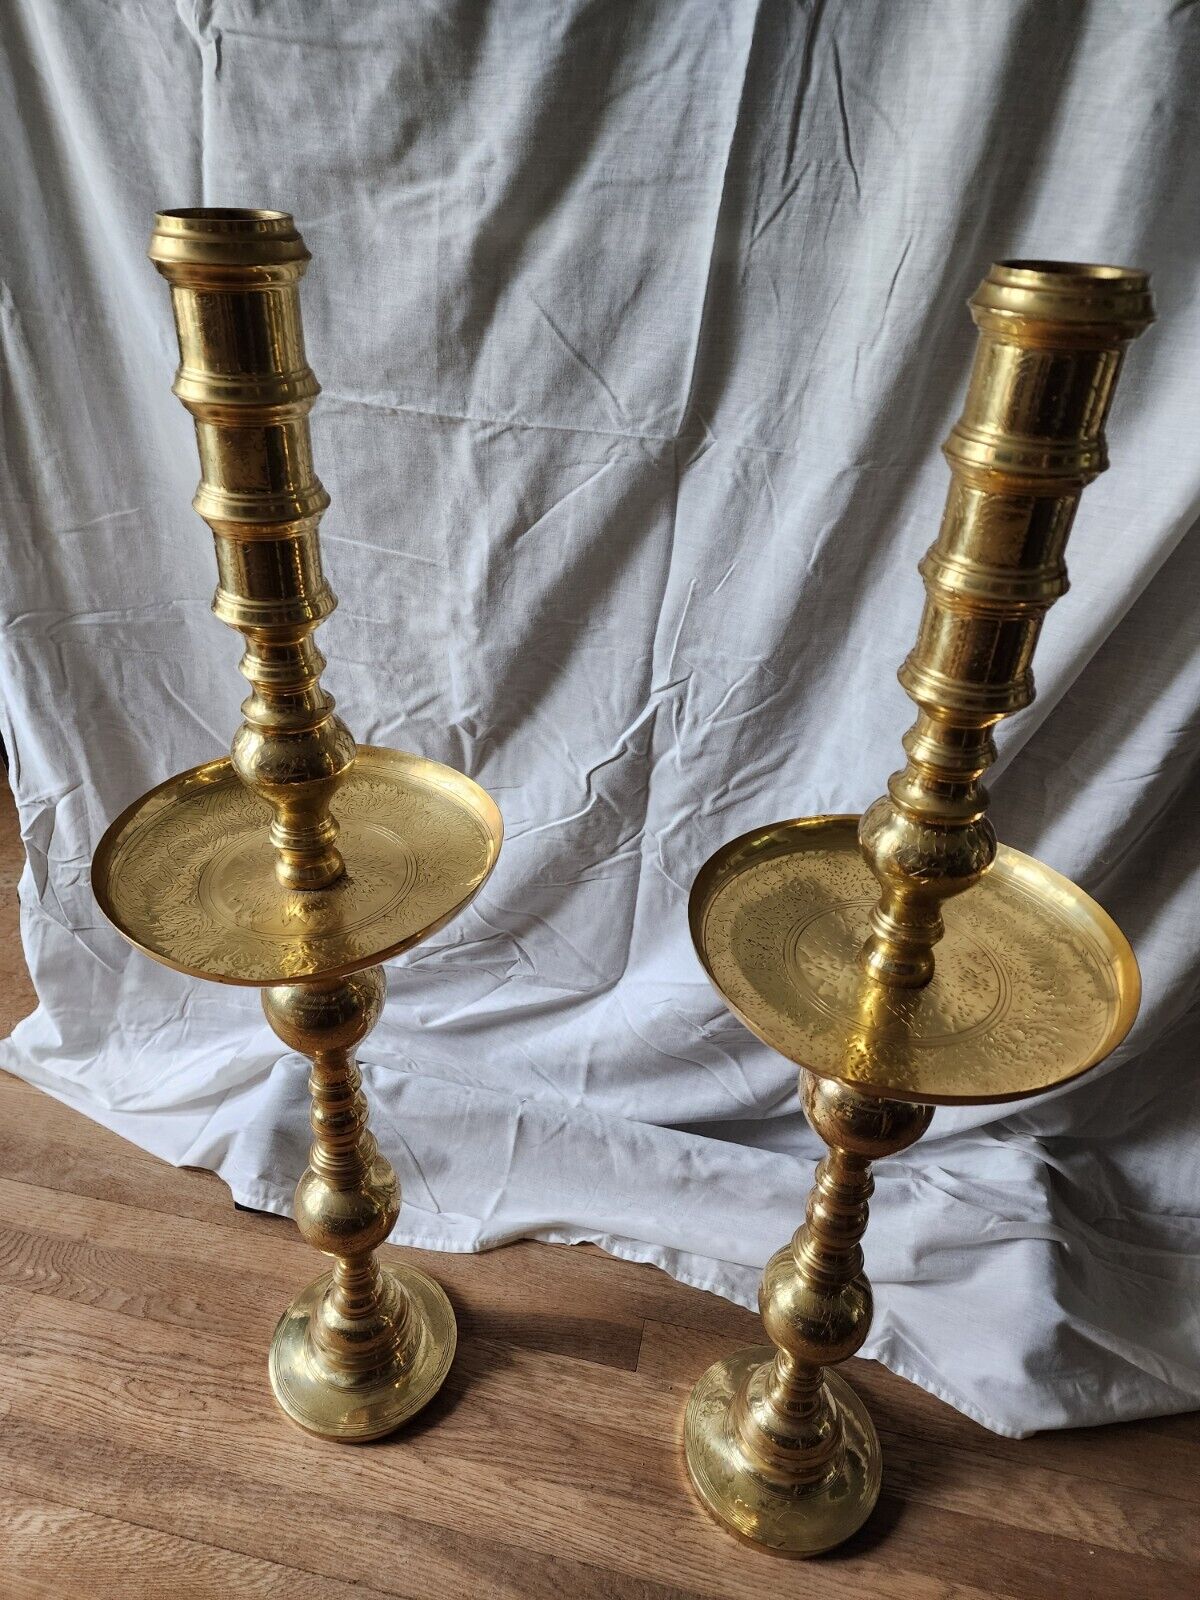 Vintage Hand-Engraved Brass Alter Candle Holders, Pair of 2